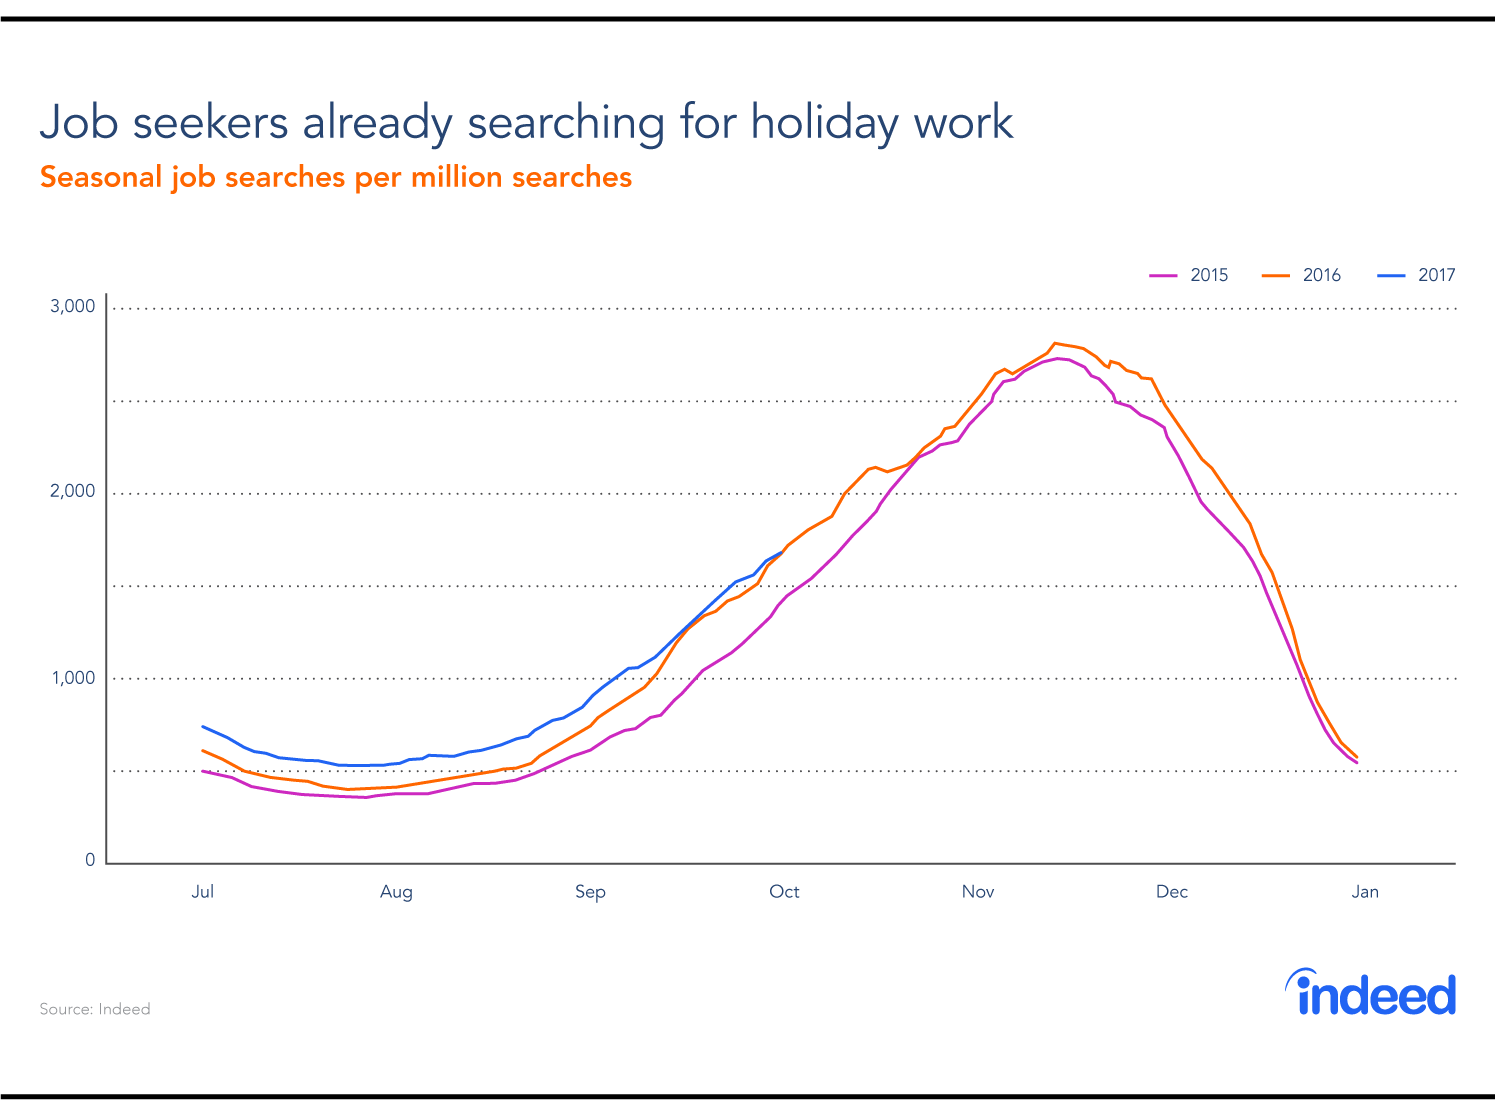 Labor Day is the unofficial start of the holiday hiring season